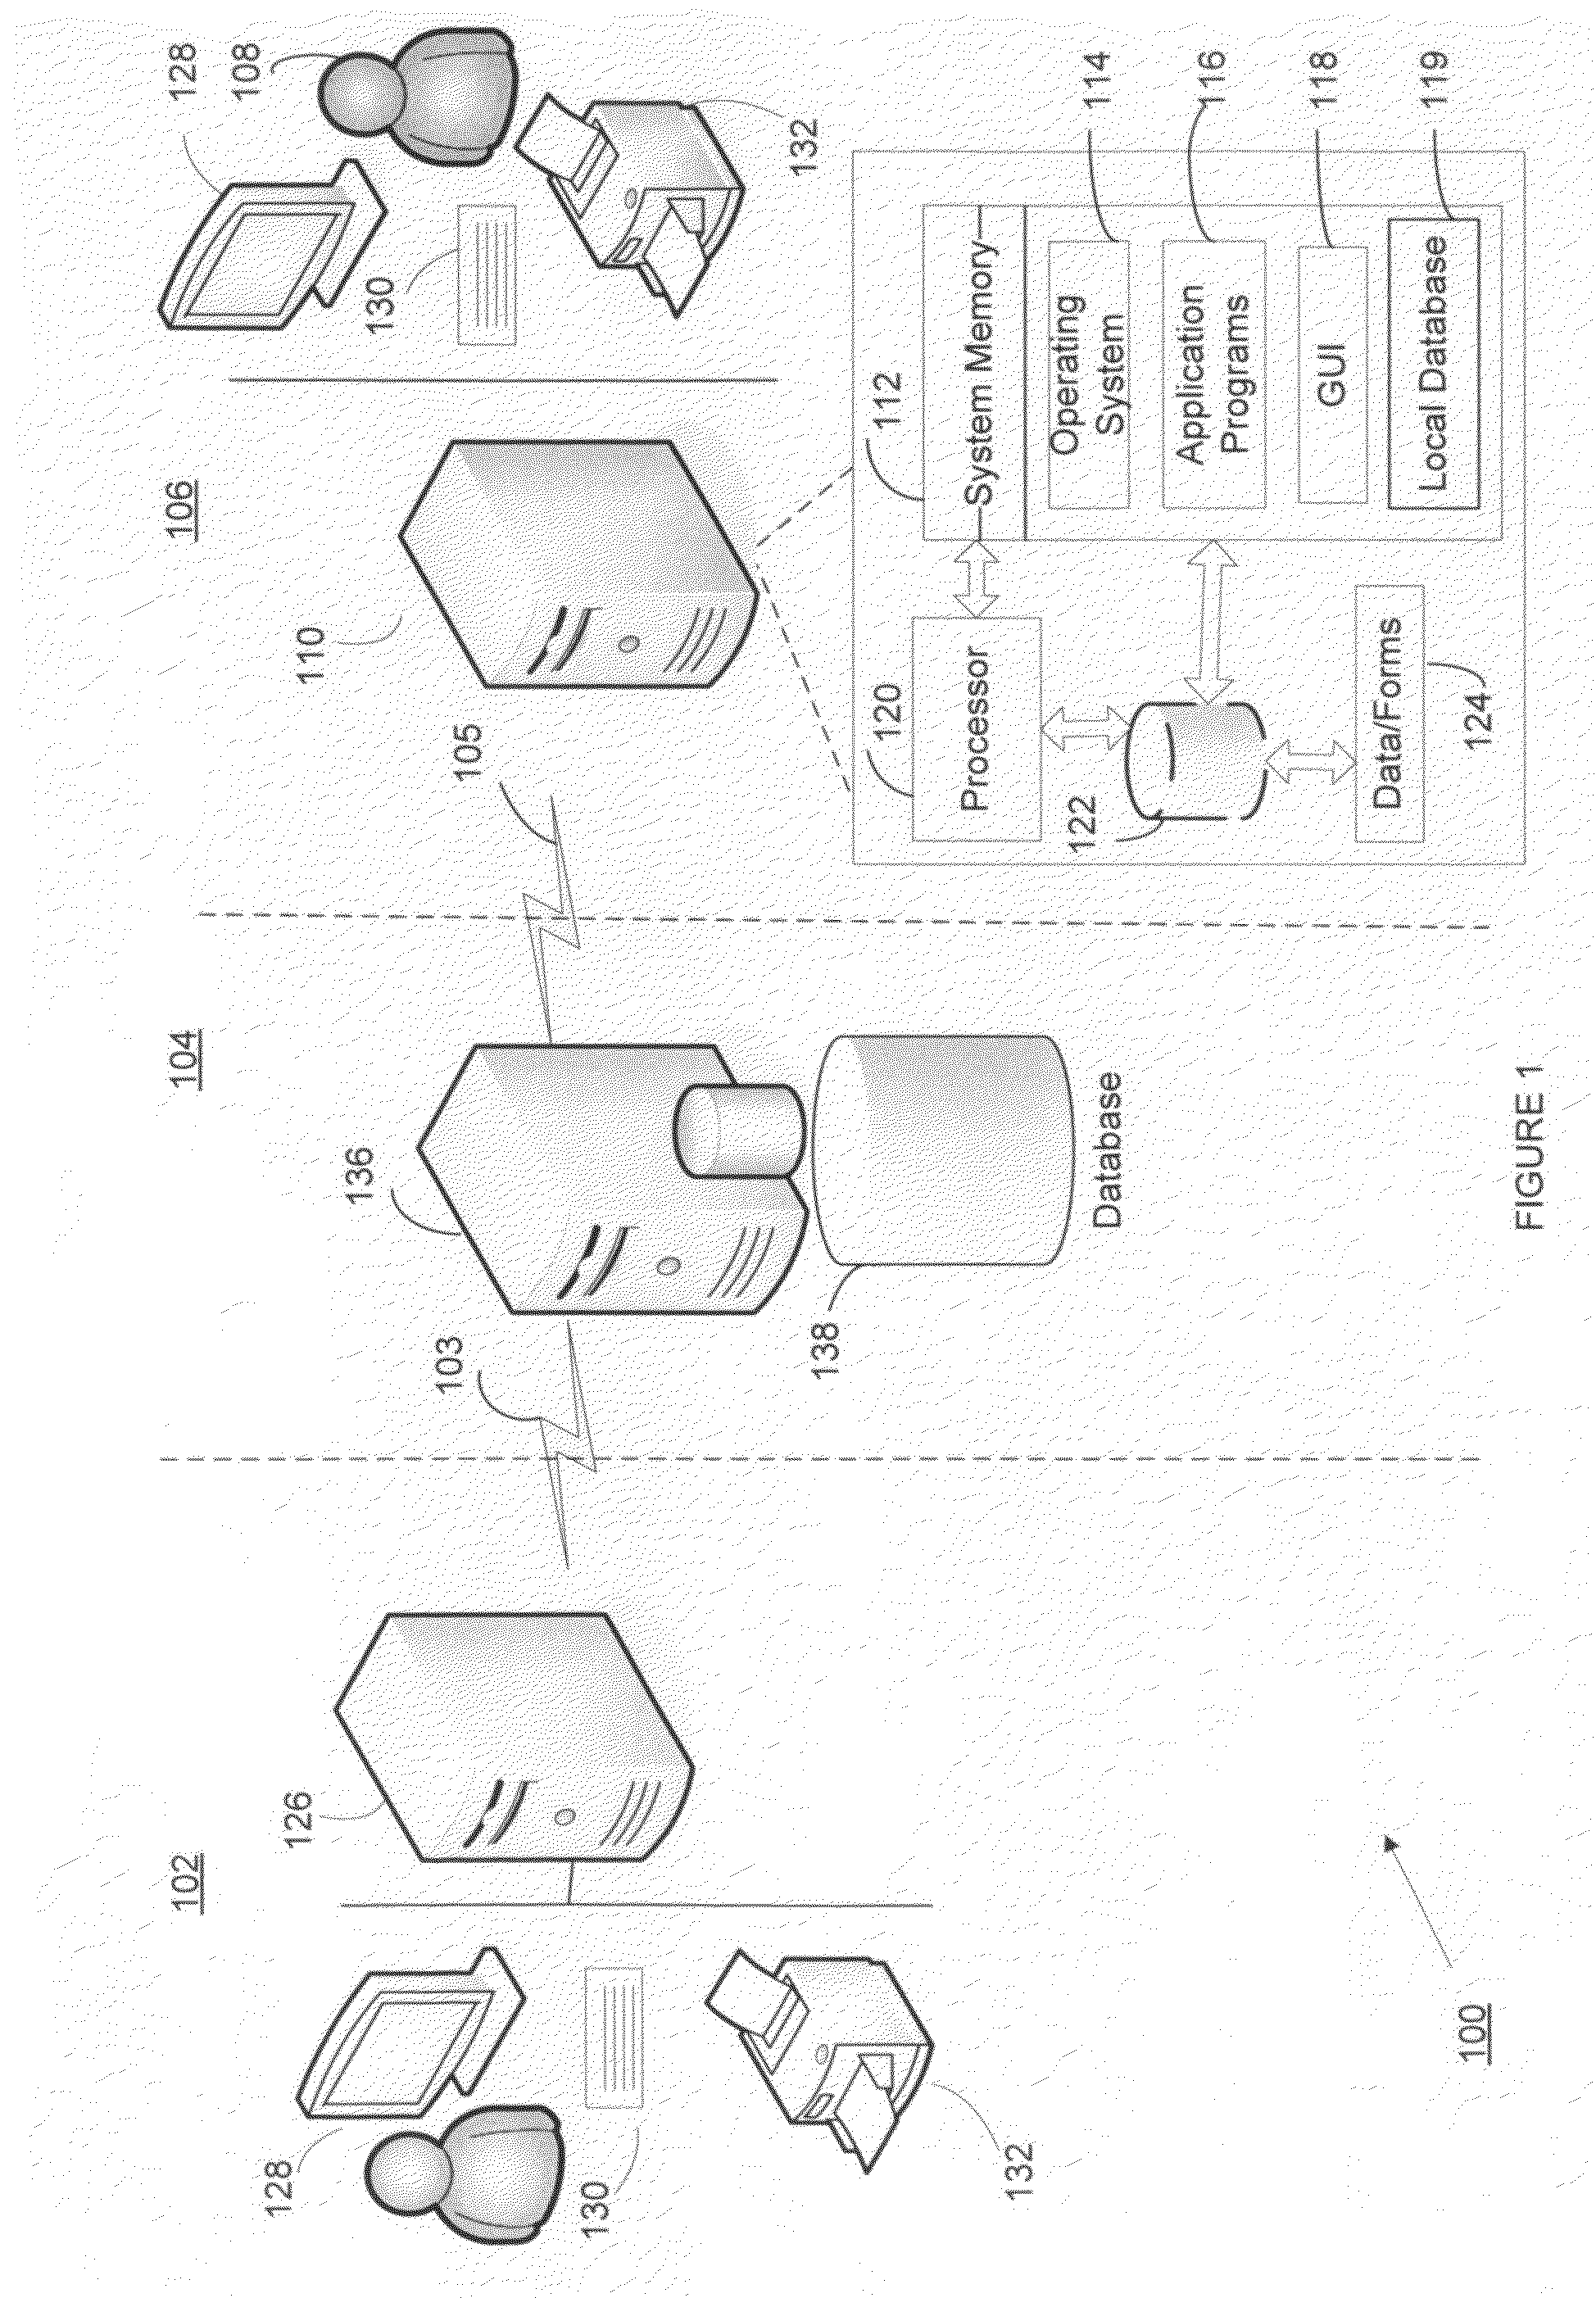 System and method for improved rating and modeling of asset backed securities